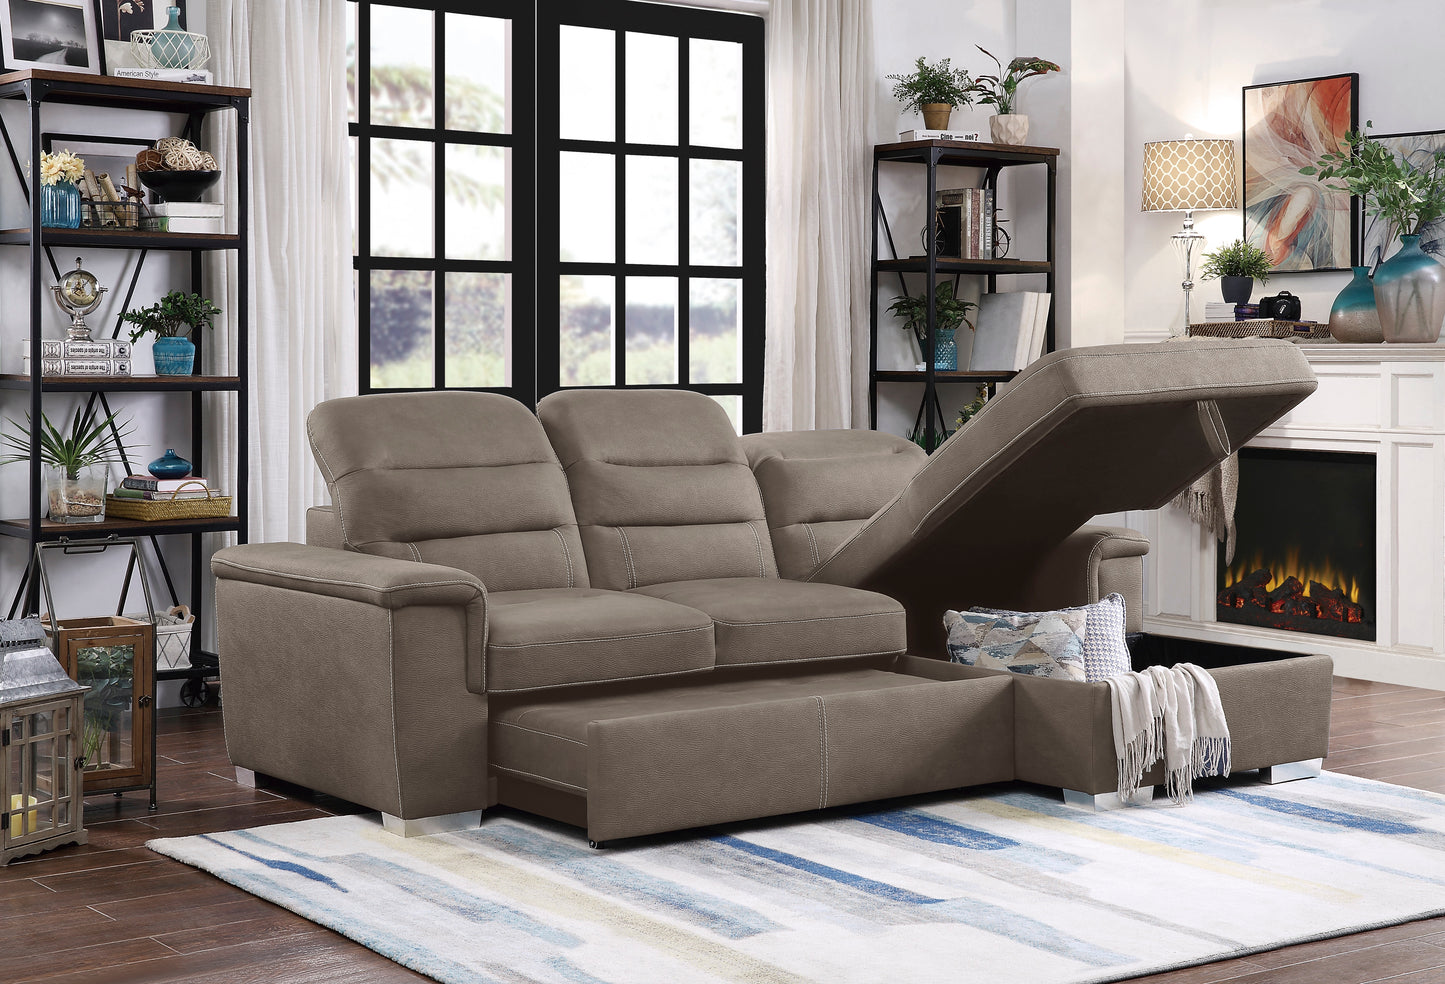 Alfio 2-Pcs Sectional w/ Adj. Headrests, Pull-out Bed & Right Chaise w/ Hidden Storage TAUPE